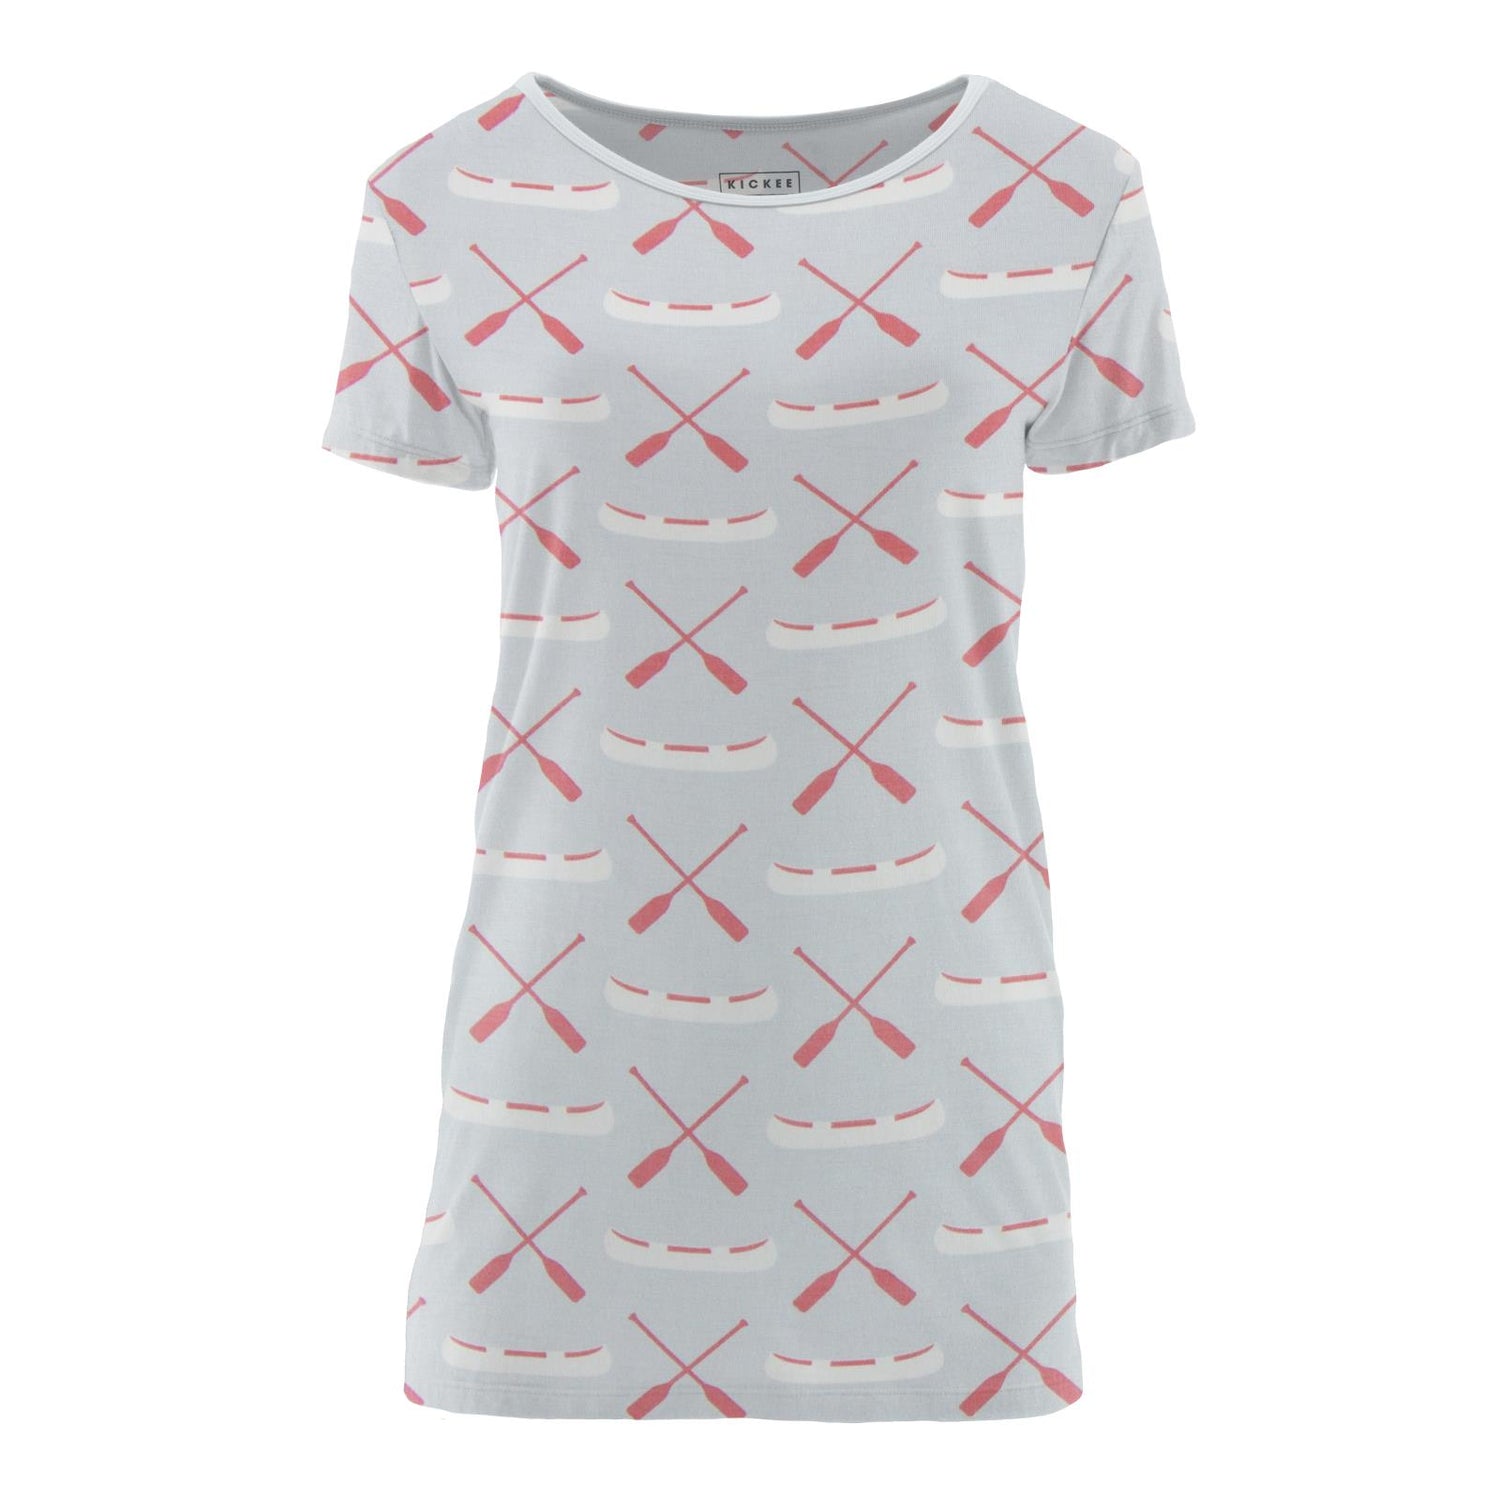 Women's Print Short Sleeve Loosey Goosey Tee in Dew Paddles and Canoe